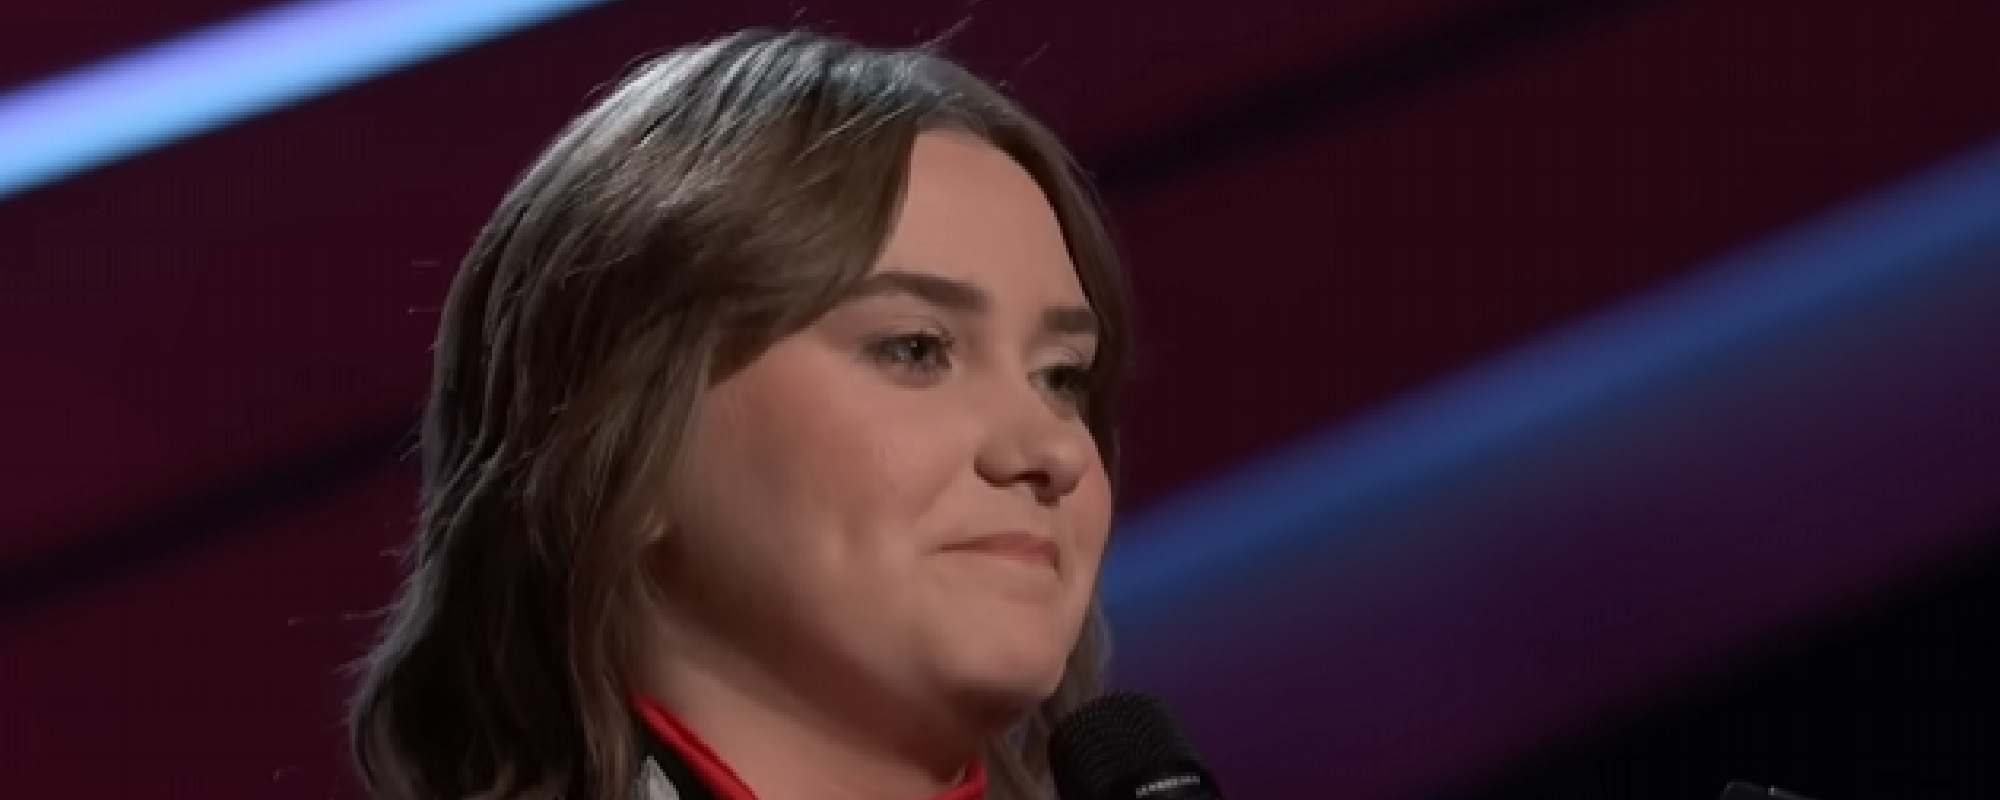 ‘The Voice’ Runner-up Ruby Leigh Finally Meets “Hero” Who Inspired Her Audition Song